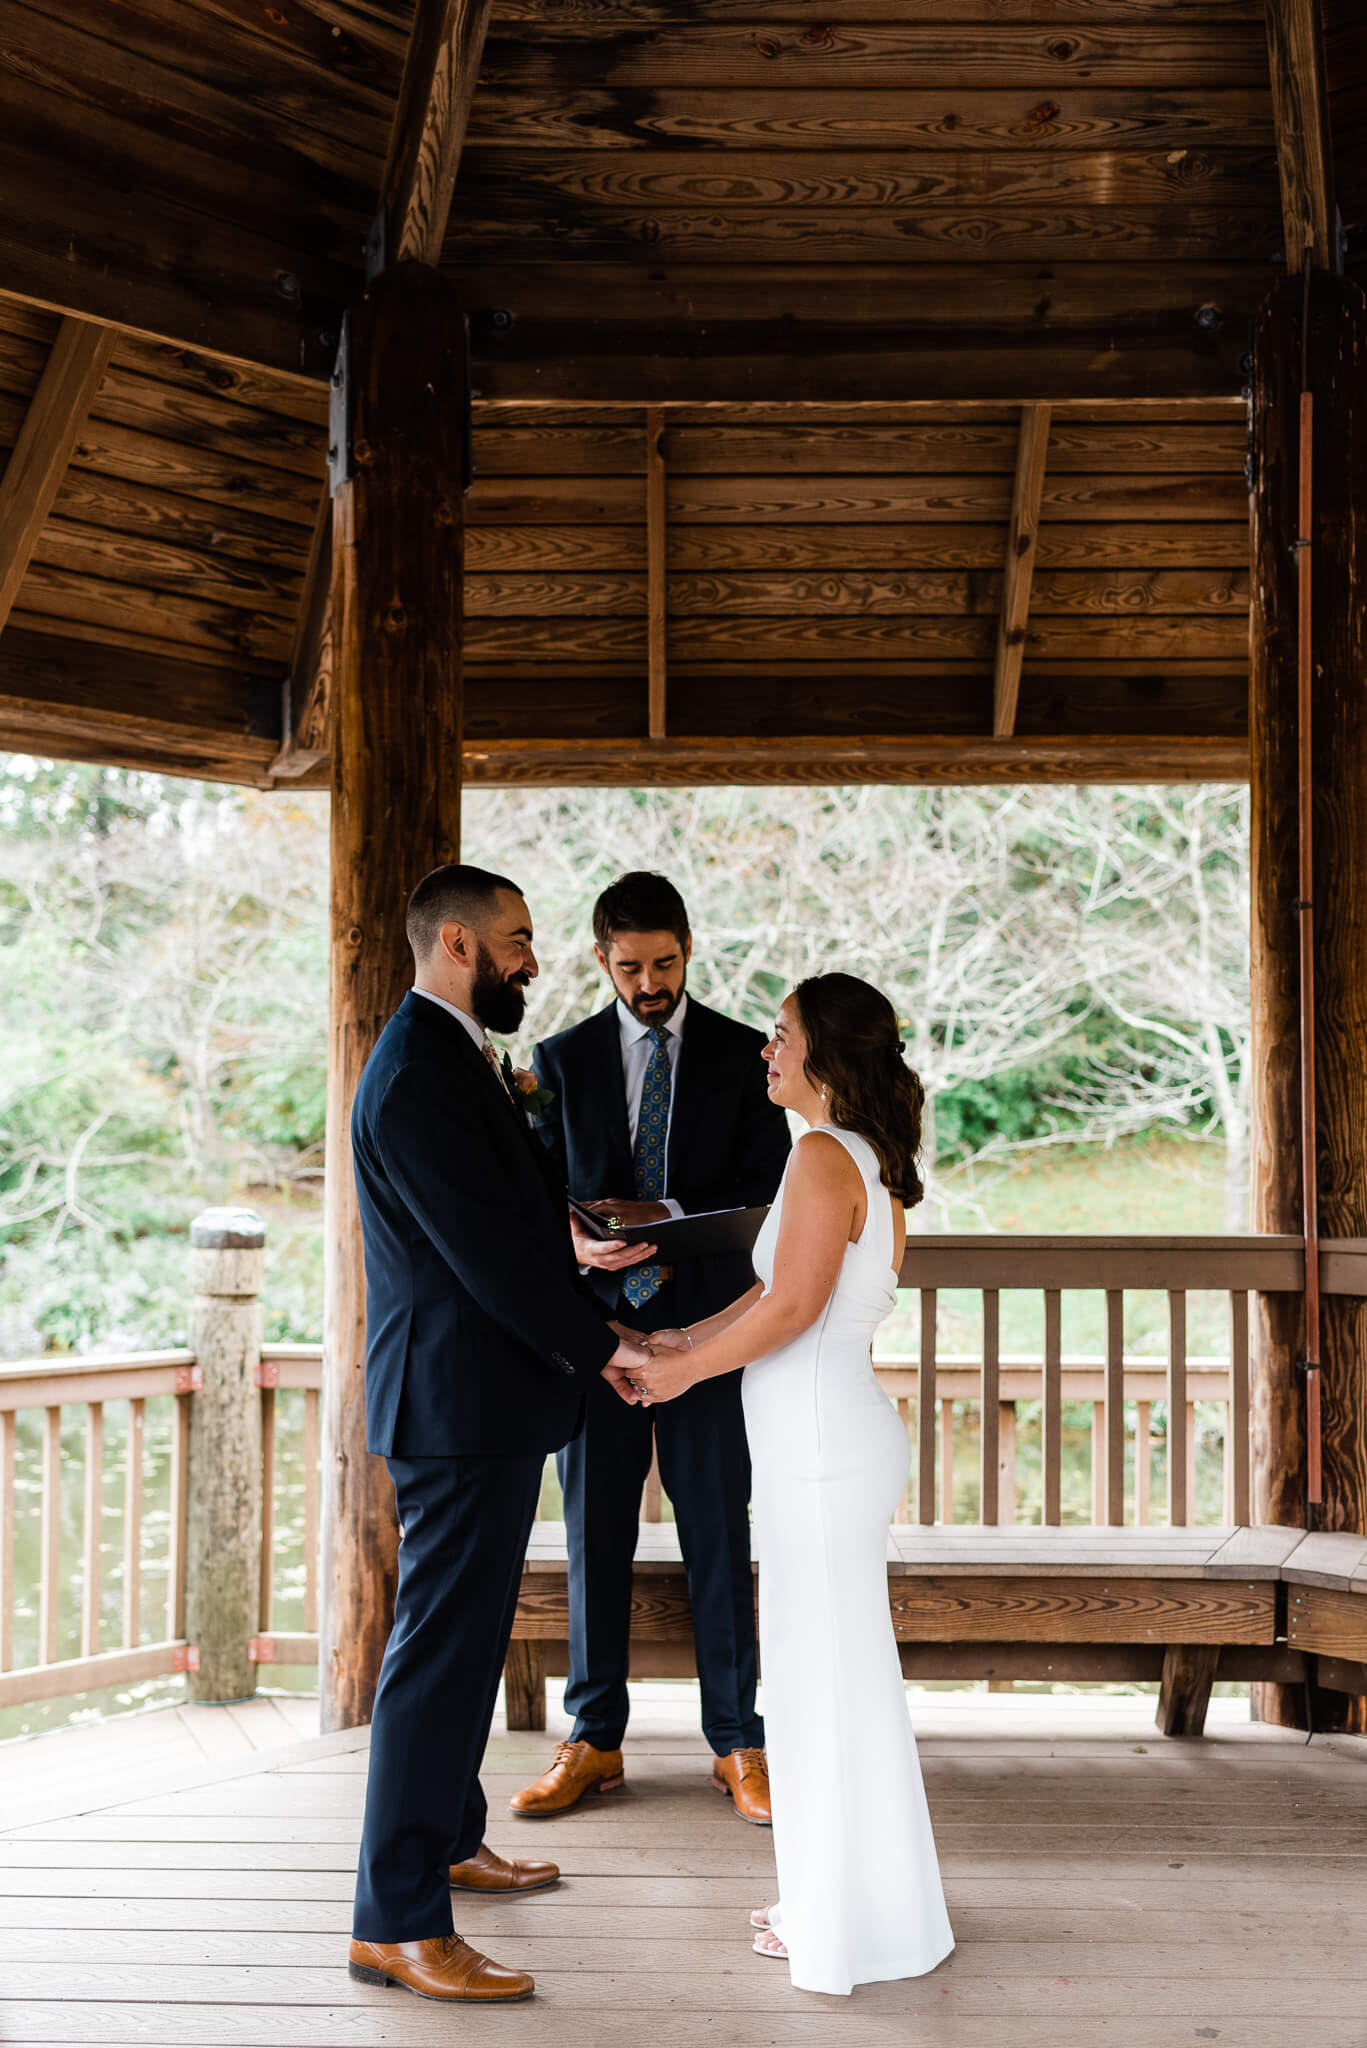 Newlyweds stand under a gazebo holding hands during their wedding ceremony smiling at each other